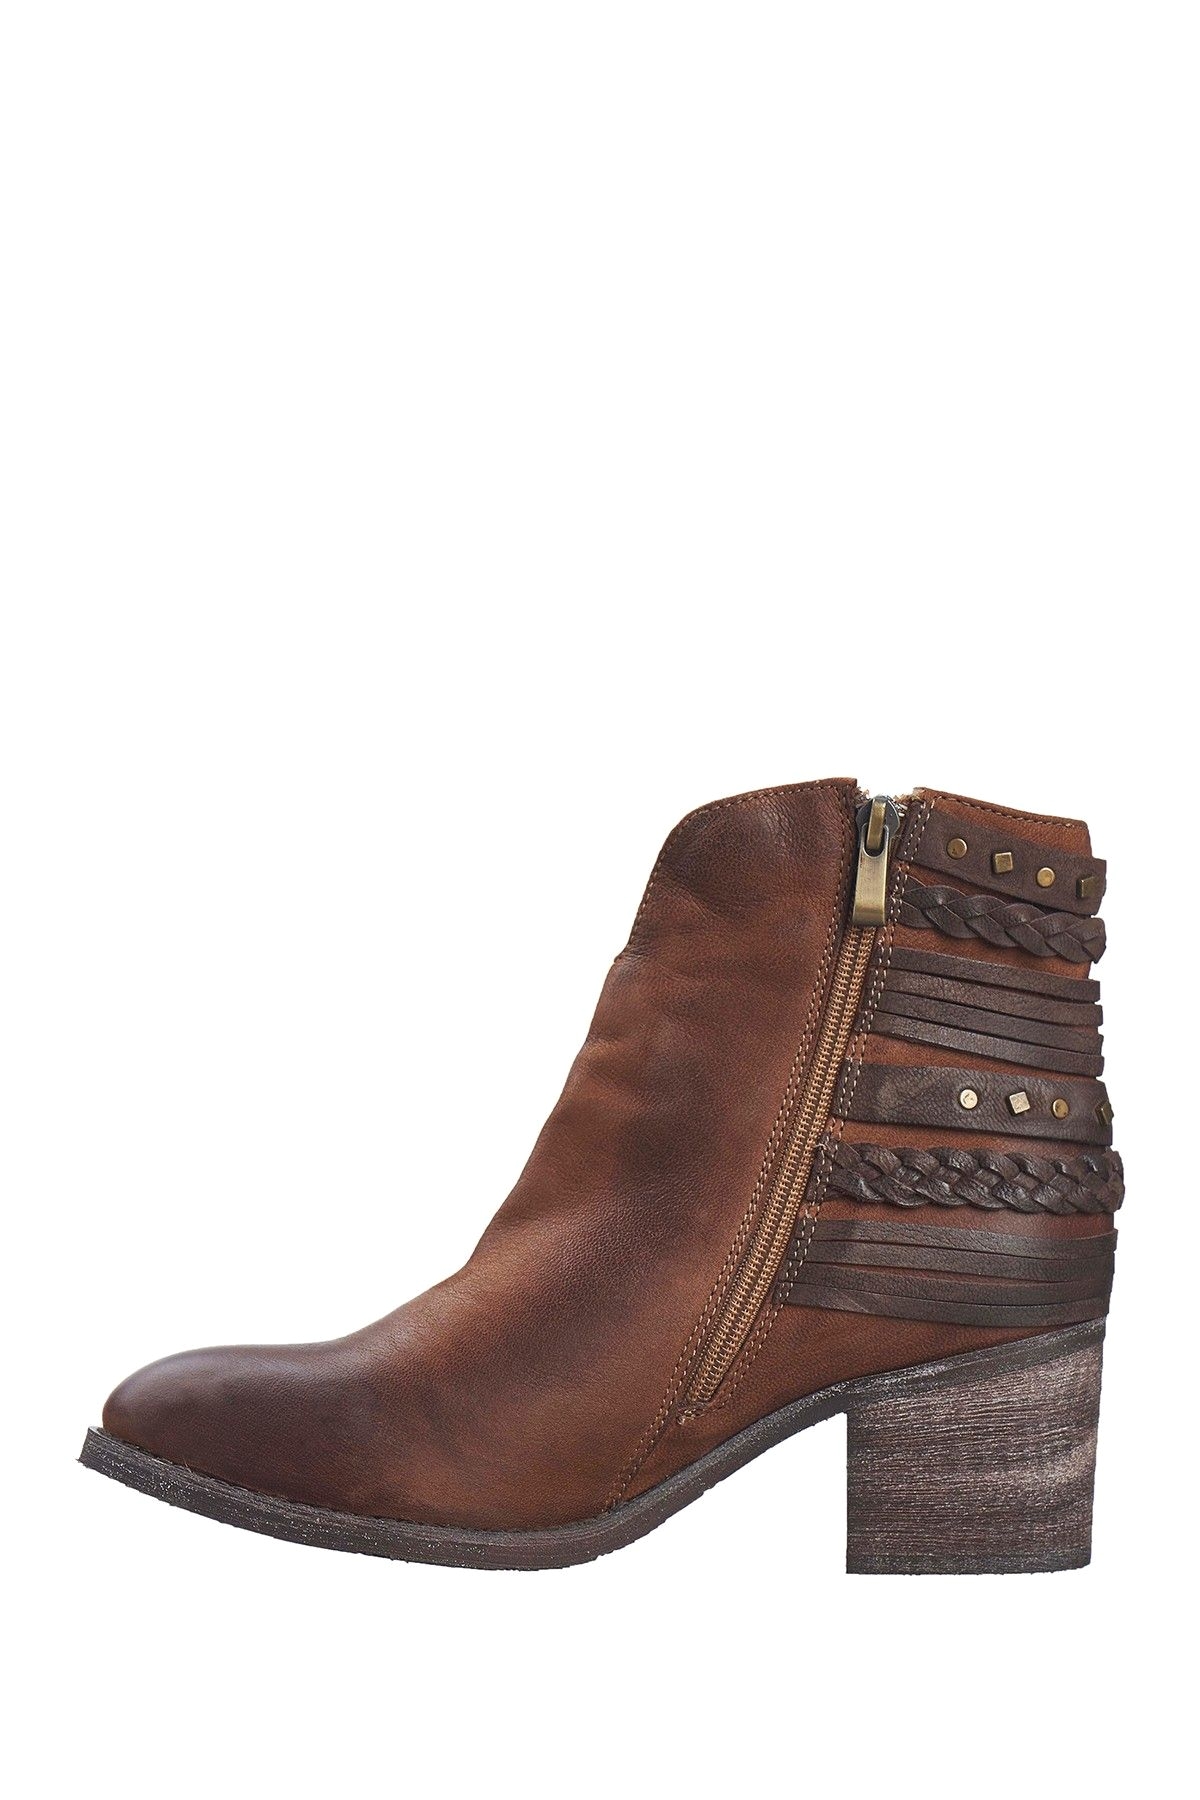 antelope strappy ankle boot nordstrom rack